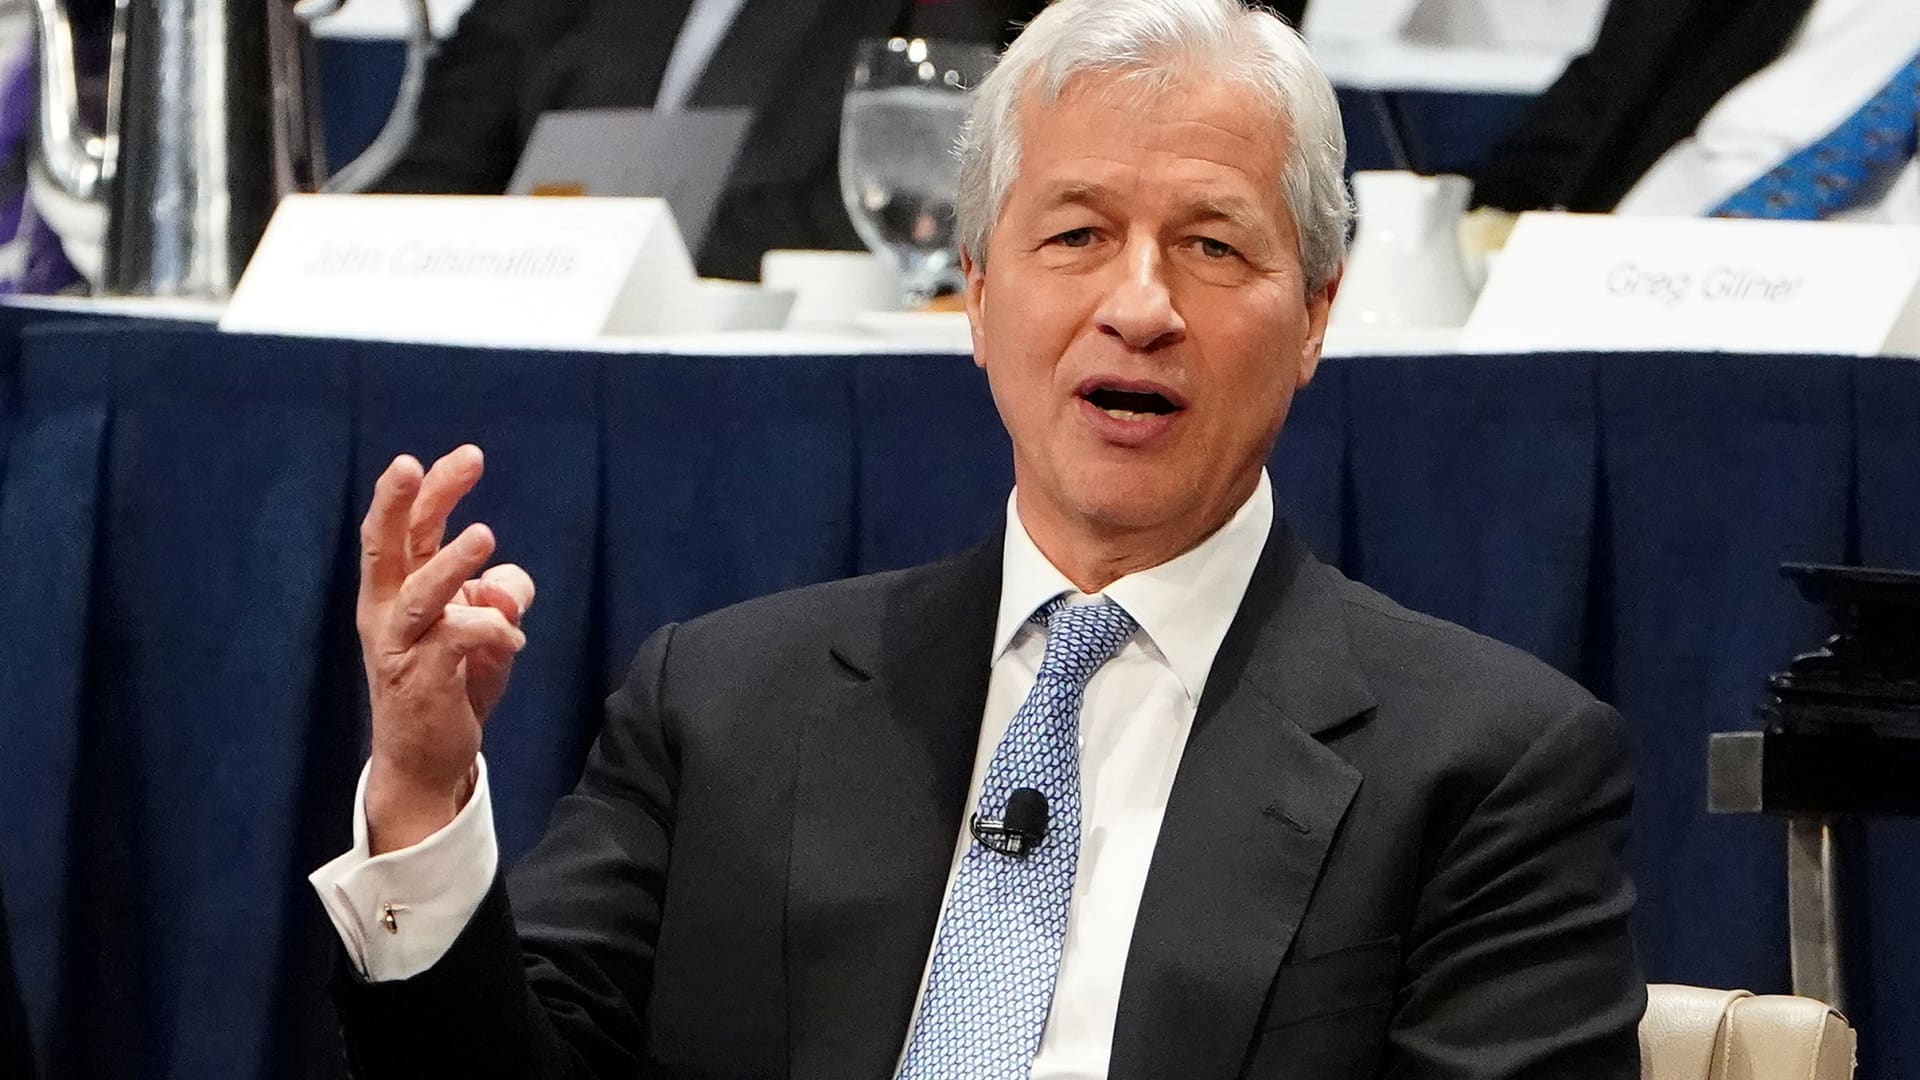 JPMorgan expects to reach 17% returns sooner than planned as rising rates provide a boost